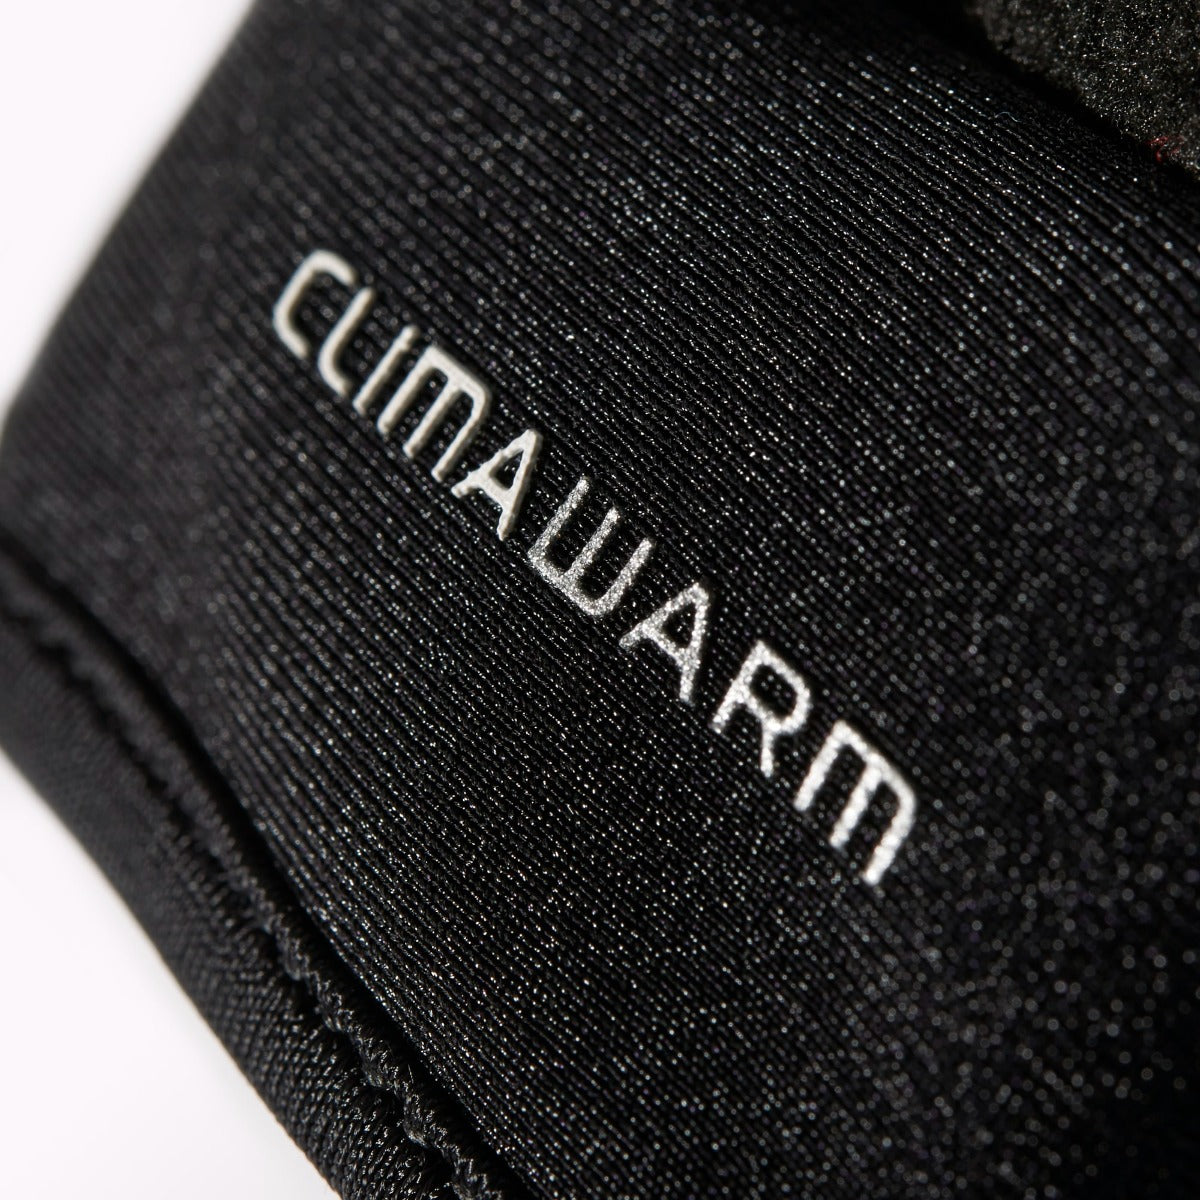 Adidas Field Players Gloves - Black (Detail 6)